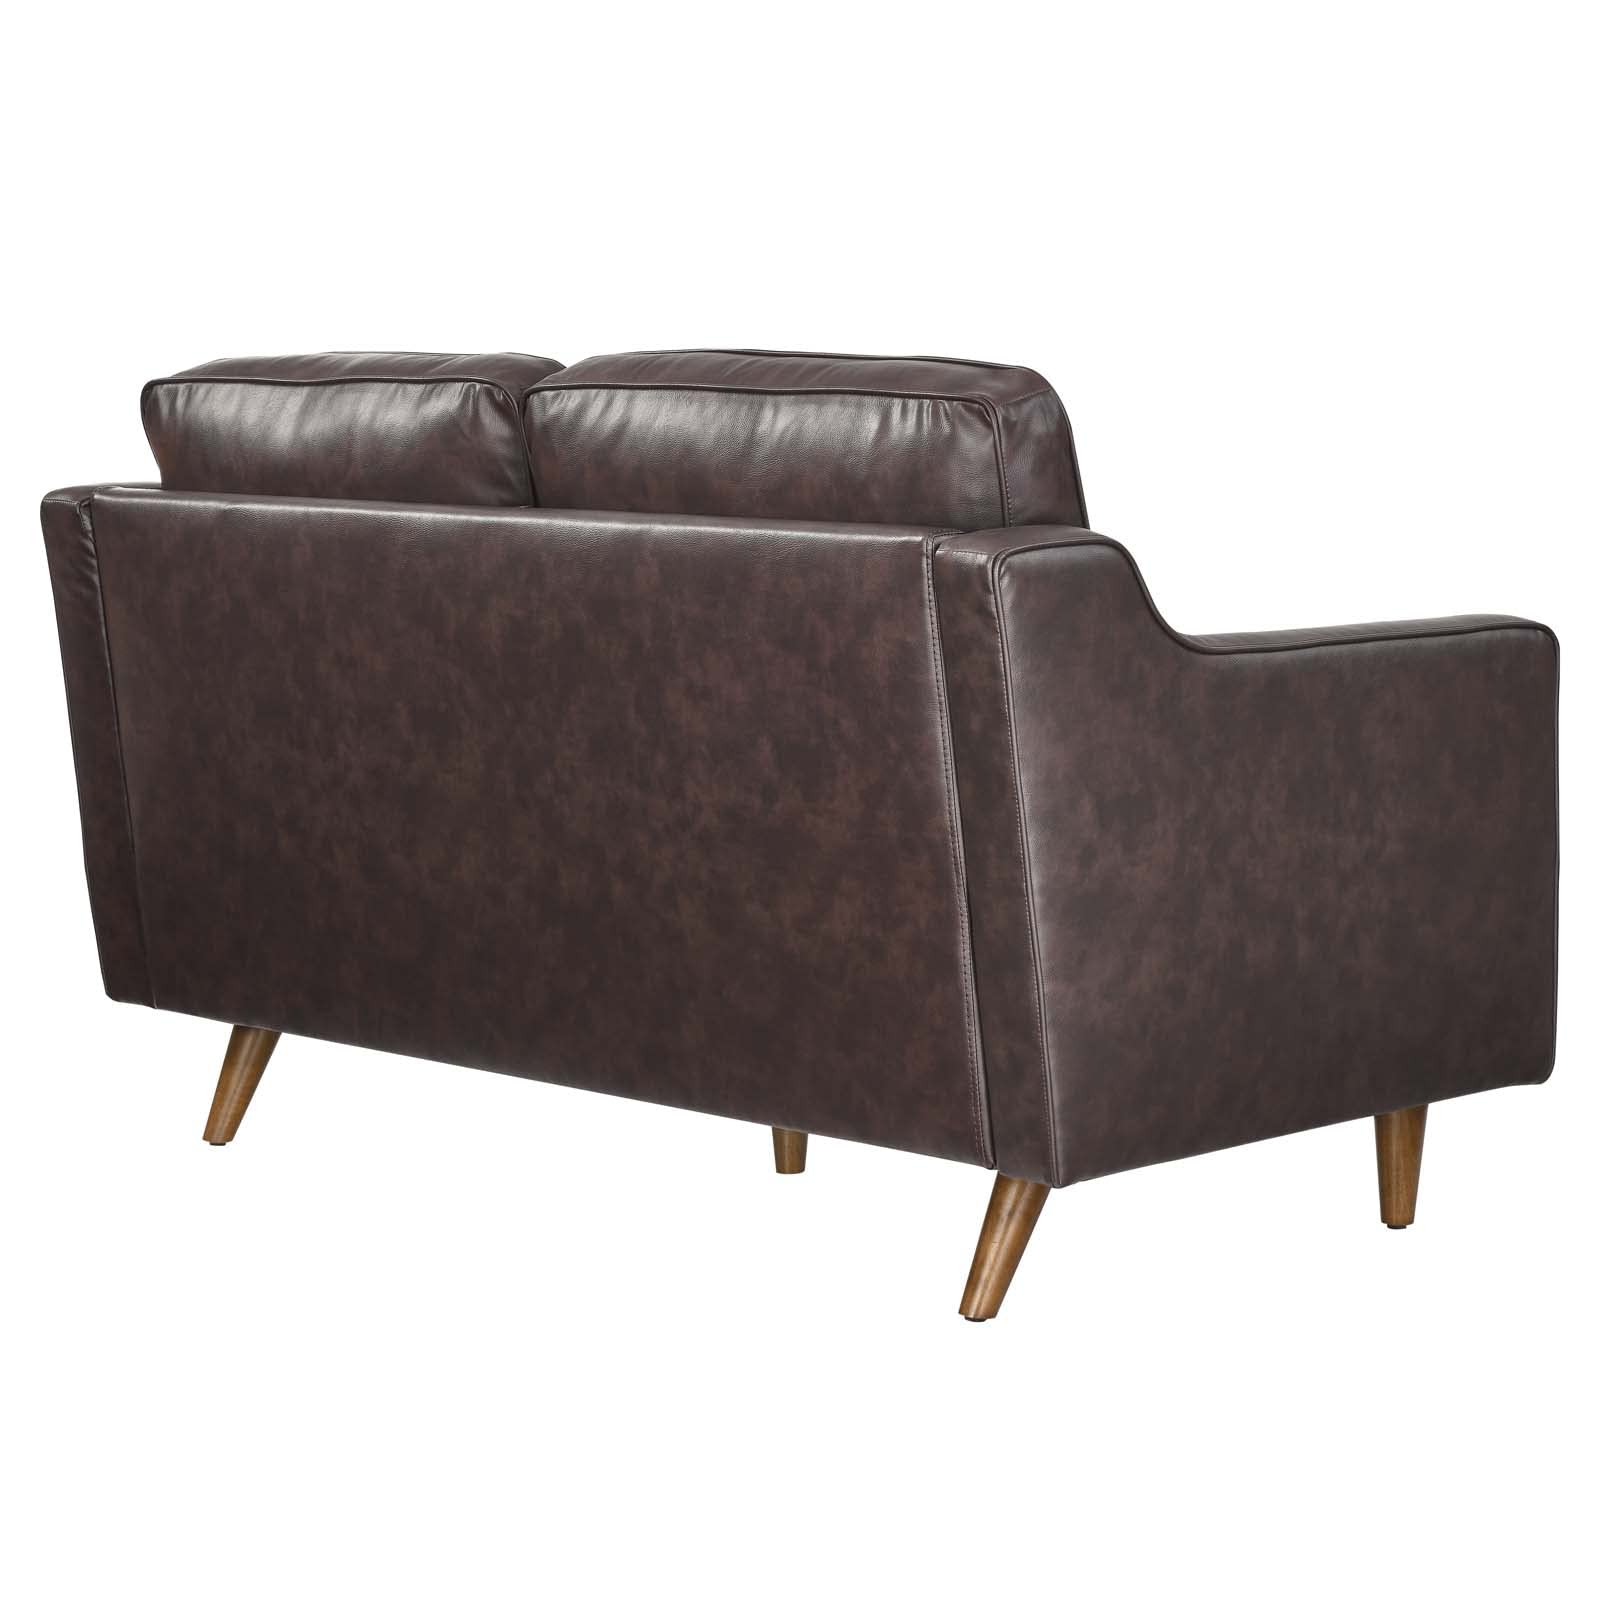 Modway Impart Upholstered Leather, Loveseat, Brown